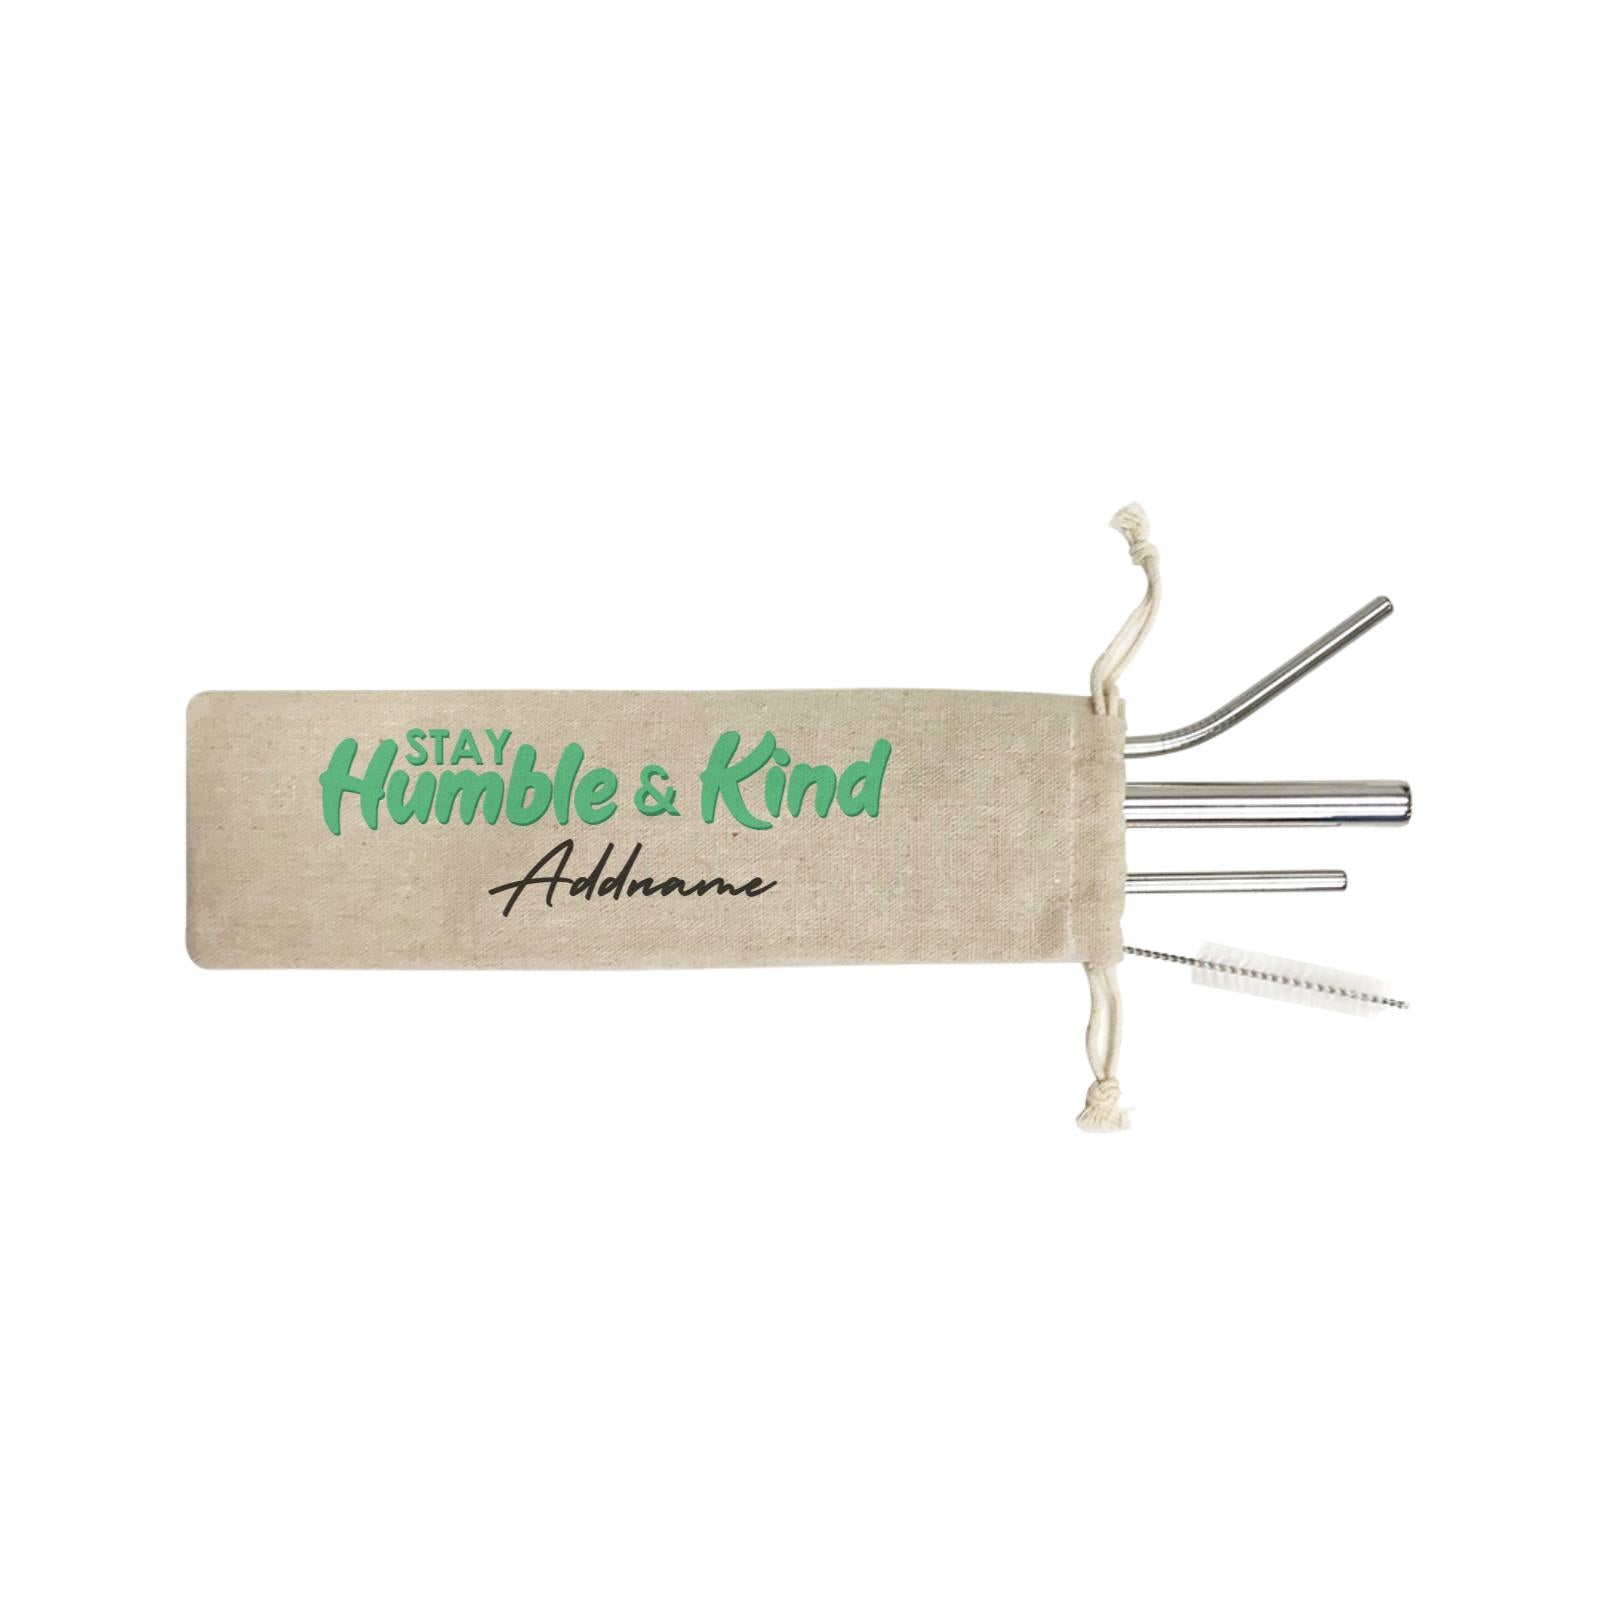 Inspiration Quotes Stay Humble and Kind Addname SB 4-in-1 Stainless Steel Straw Set In a Satchel